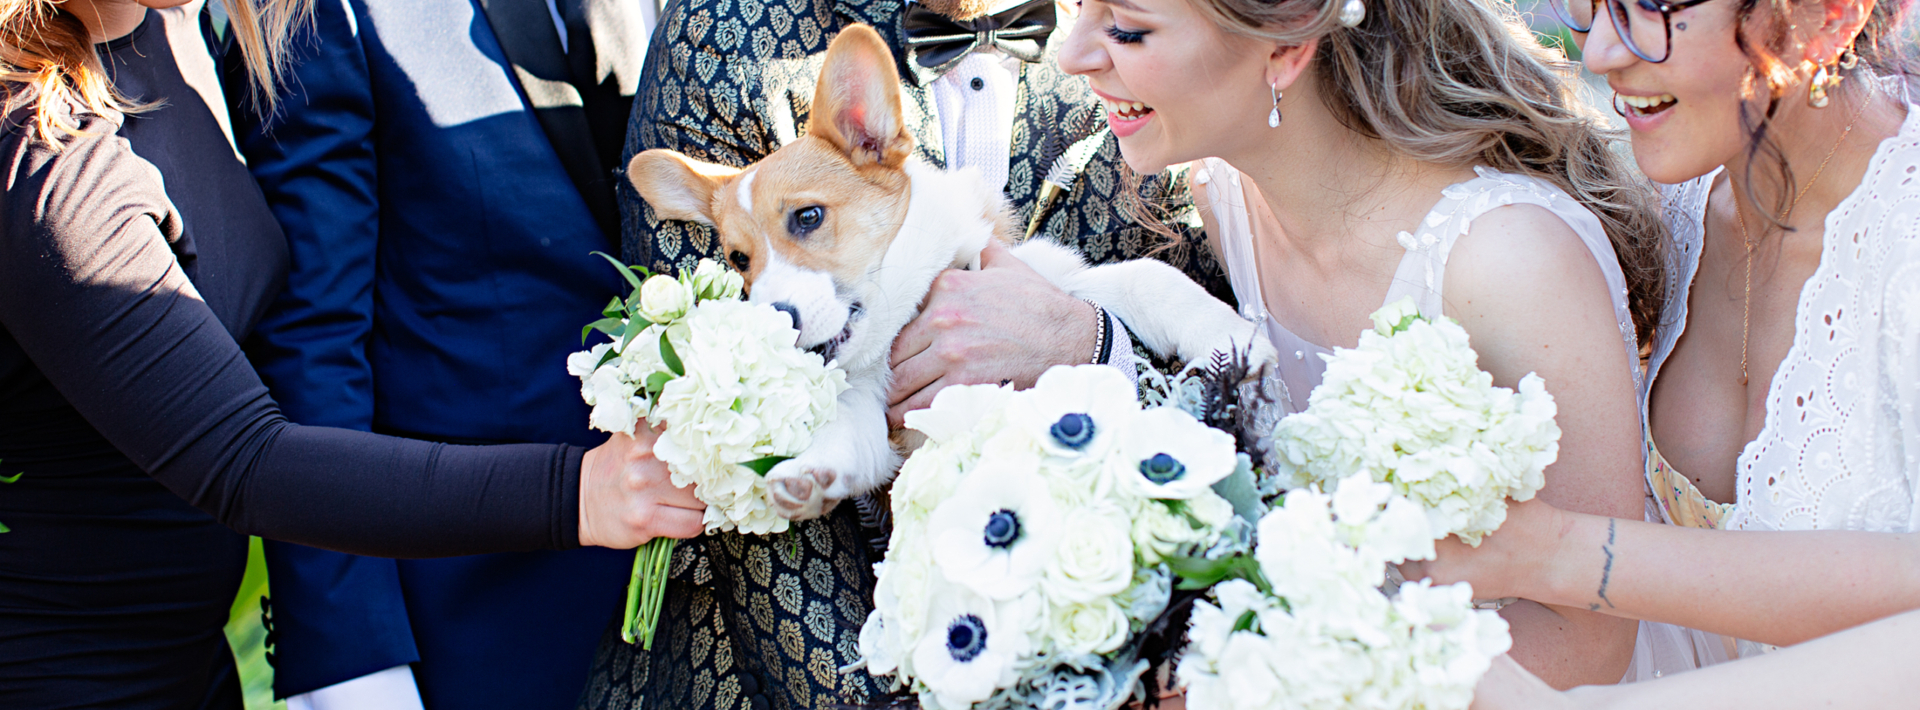 Bridal party and bride and groom enjoying their wedding day with their dog, they are having fun and laughing captured by wedding photographer Carlsbad Photo